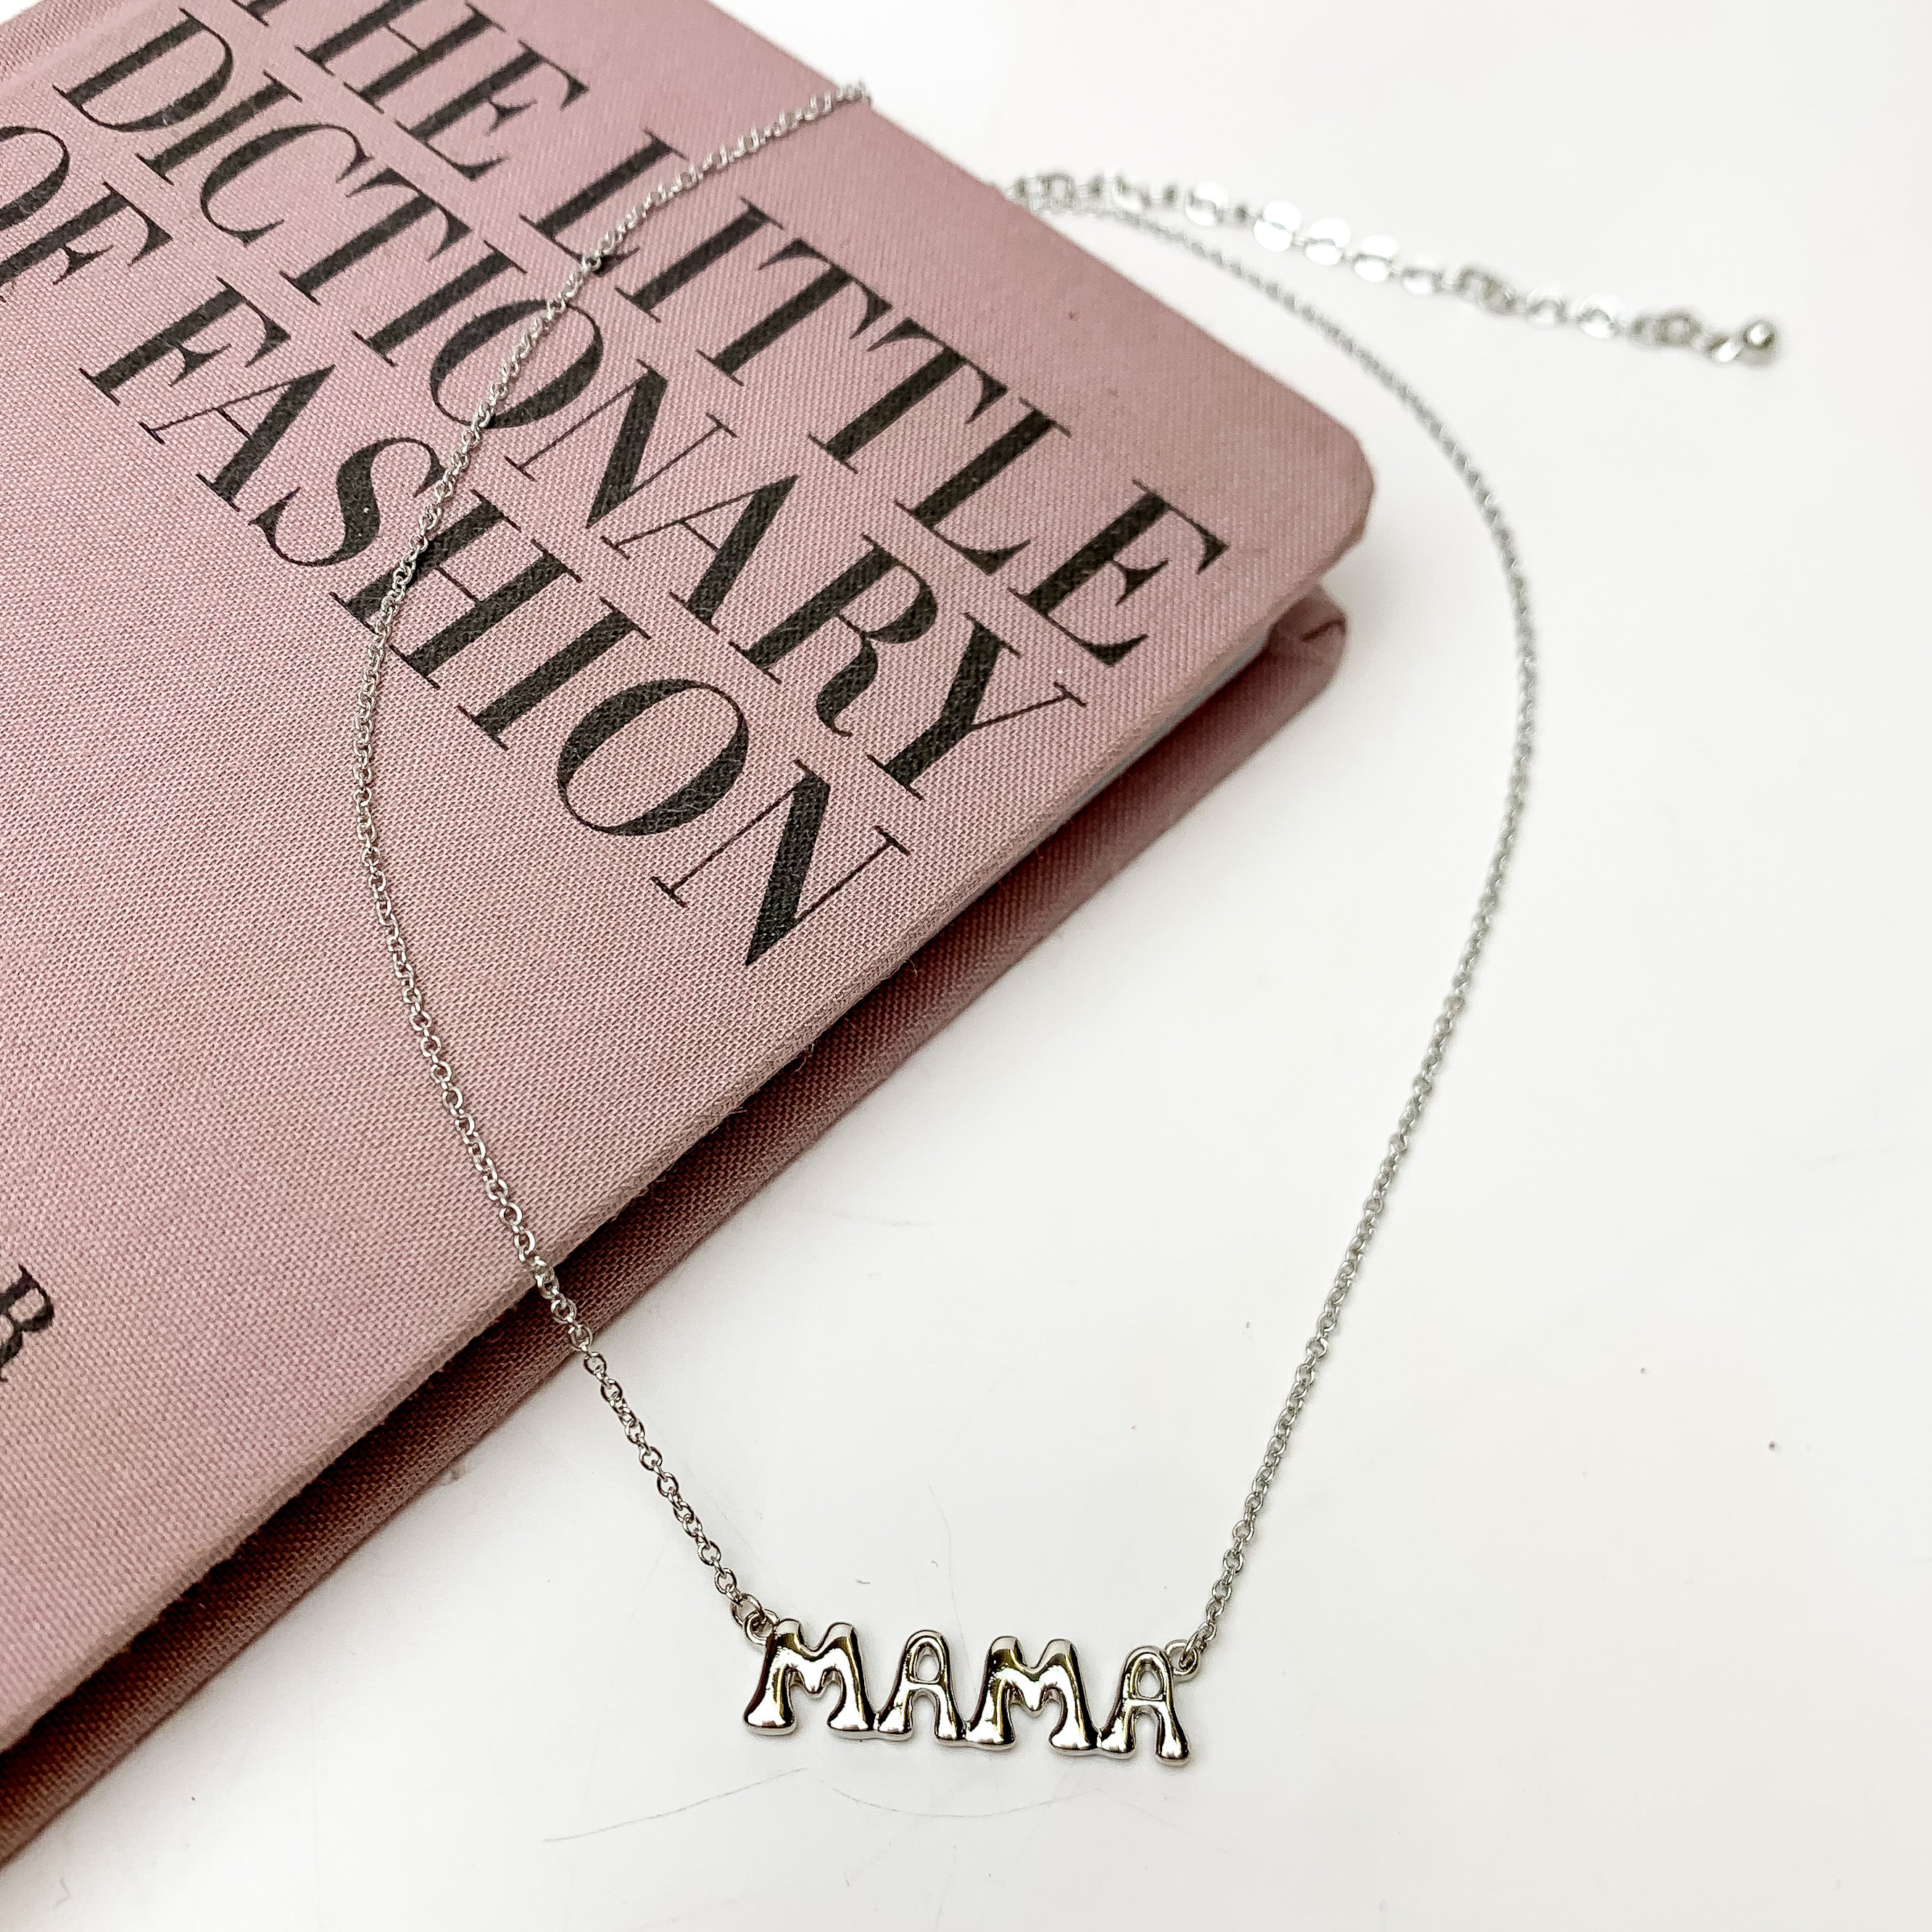 Mama Bubble Letter Chain Necklace in Silver Tone. This necklace is pictured on a white background with part of it on a pink book.